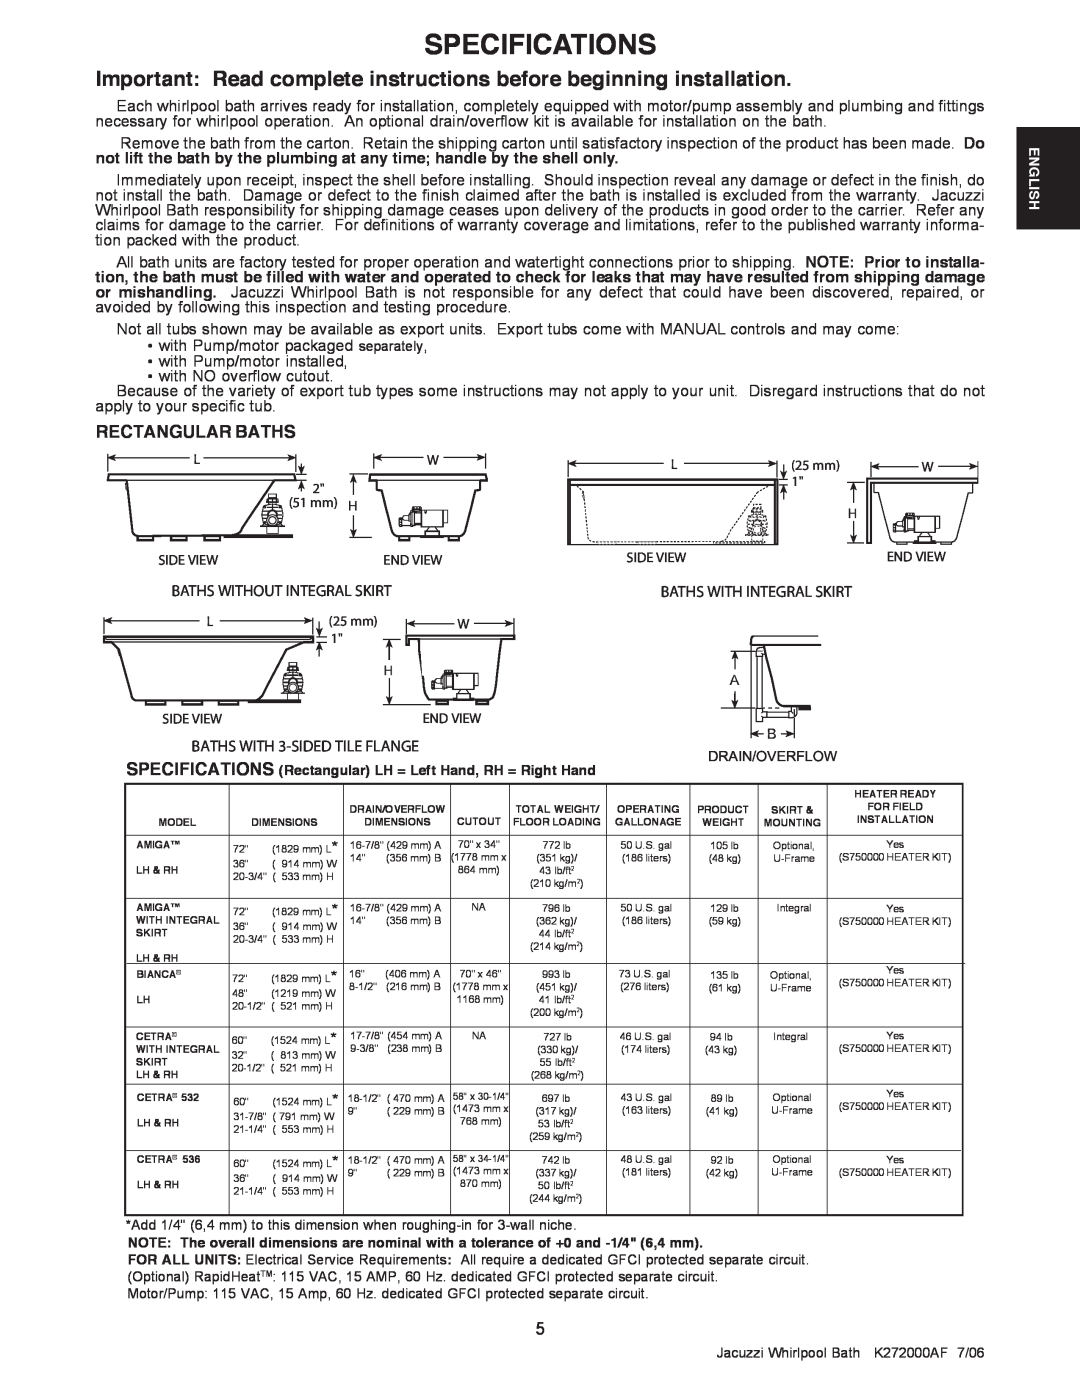 Jacuzzi K272000AF 7/06 manual Specifications, Important Read complete instructions before beginning installation 